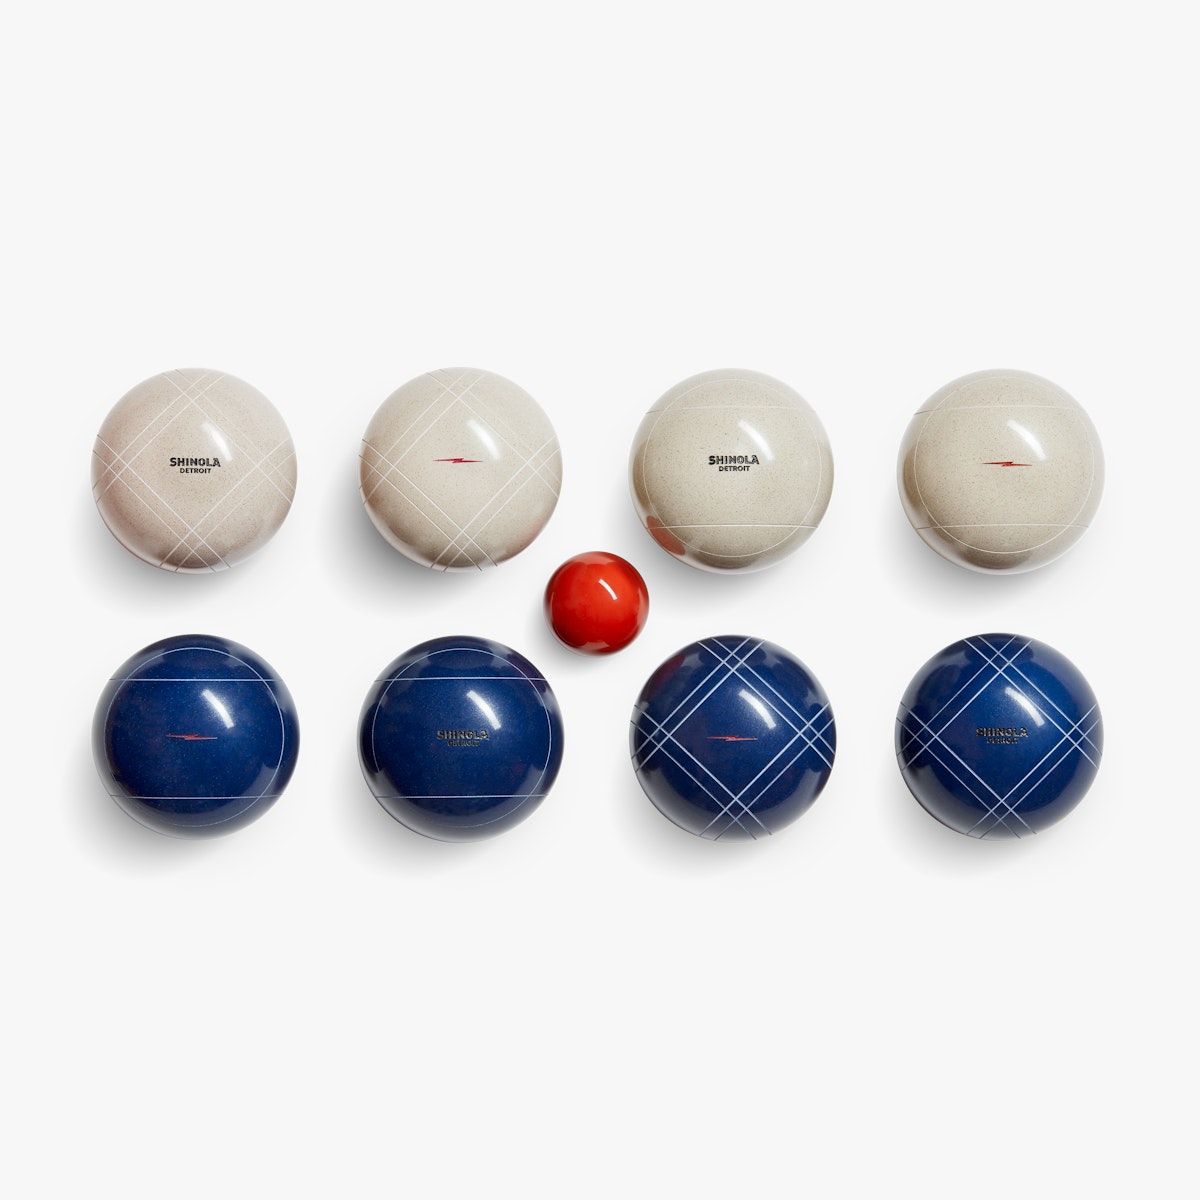 Petanque / Boules Set For Bocce and More with 8 Steel Tossing